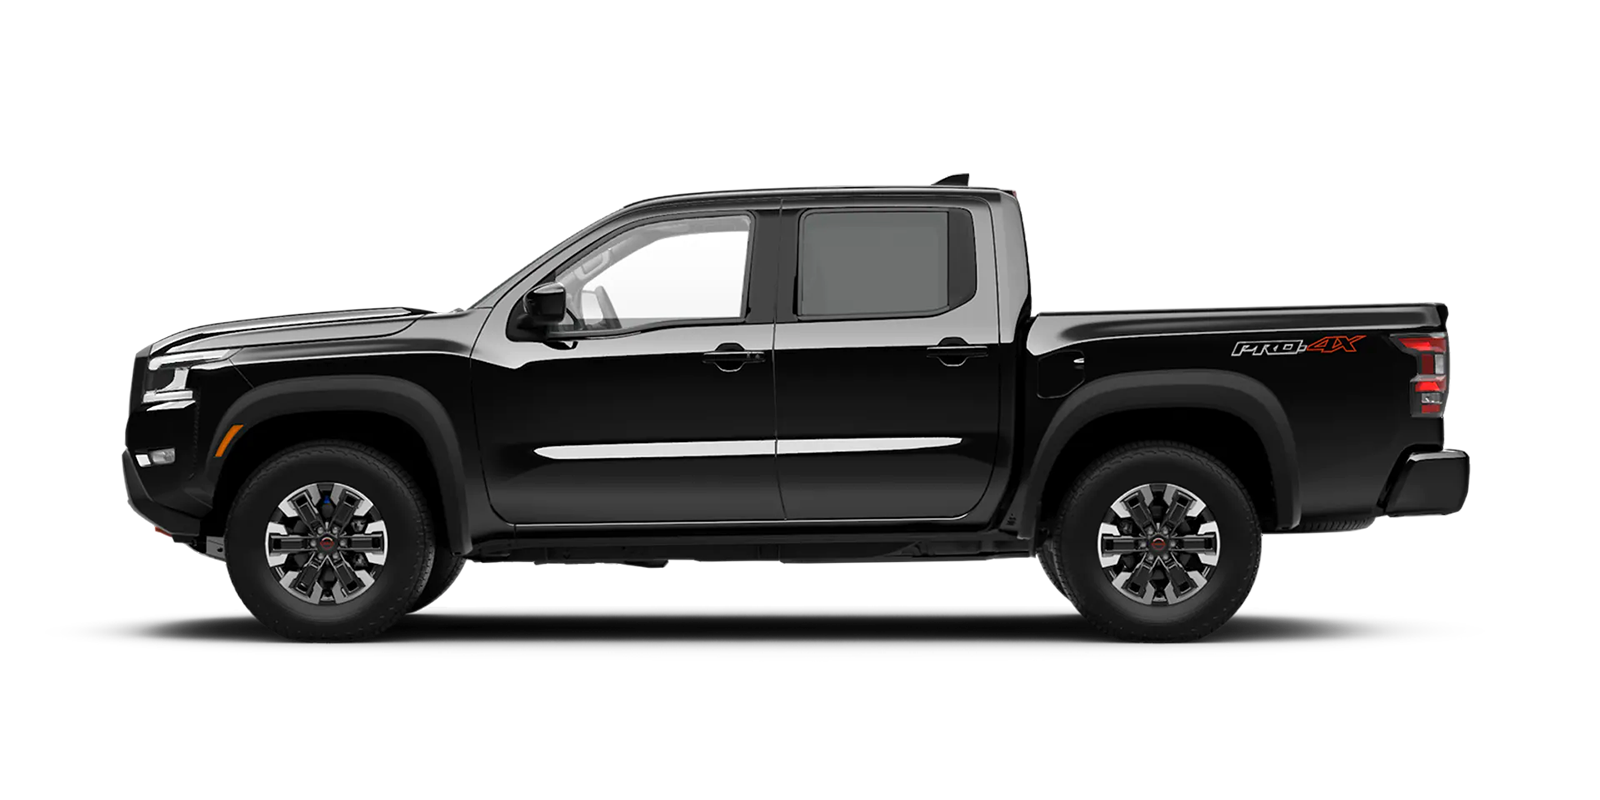 2022 Frontier Crew Cab Pro-4X 4x4 in Super Black | Greenway Nissan of Florence in Florence AL